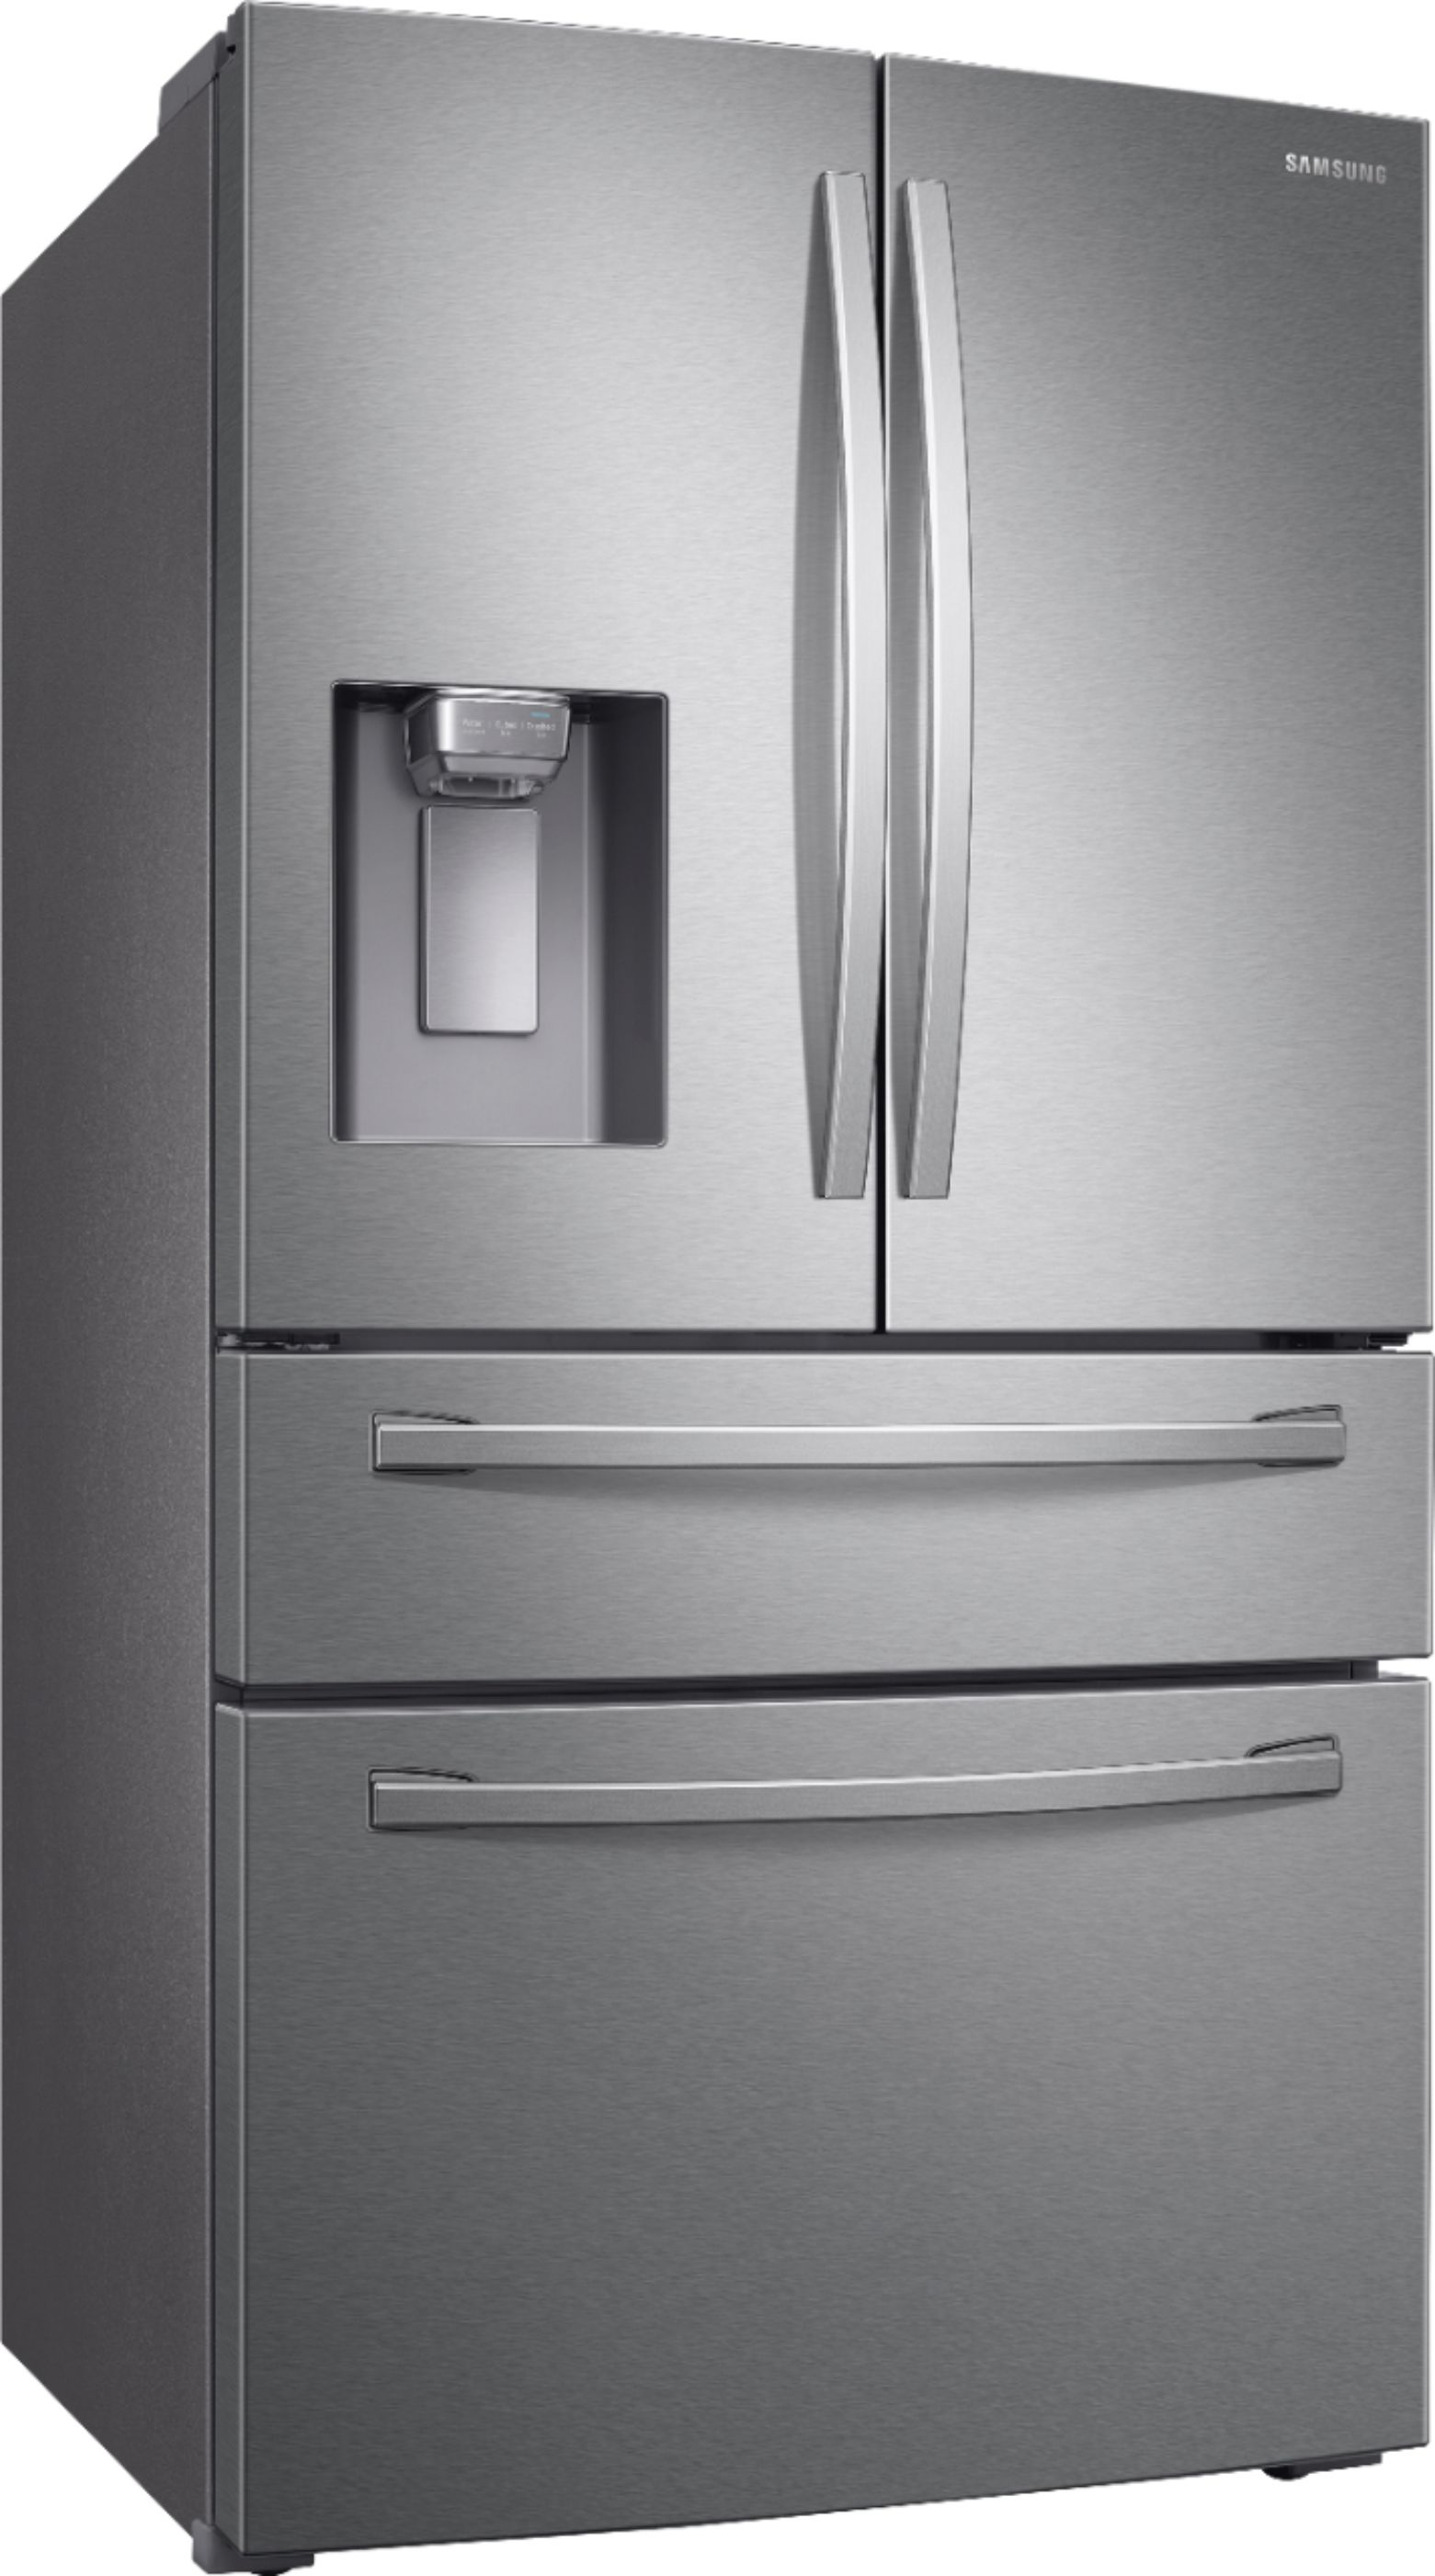 Angle View: Samsung - 22.6 cu. ft. 4-Door French Door Counter Depth Refrigerator with FlexZone Drawer - Stainless steel